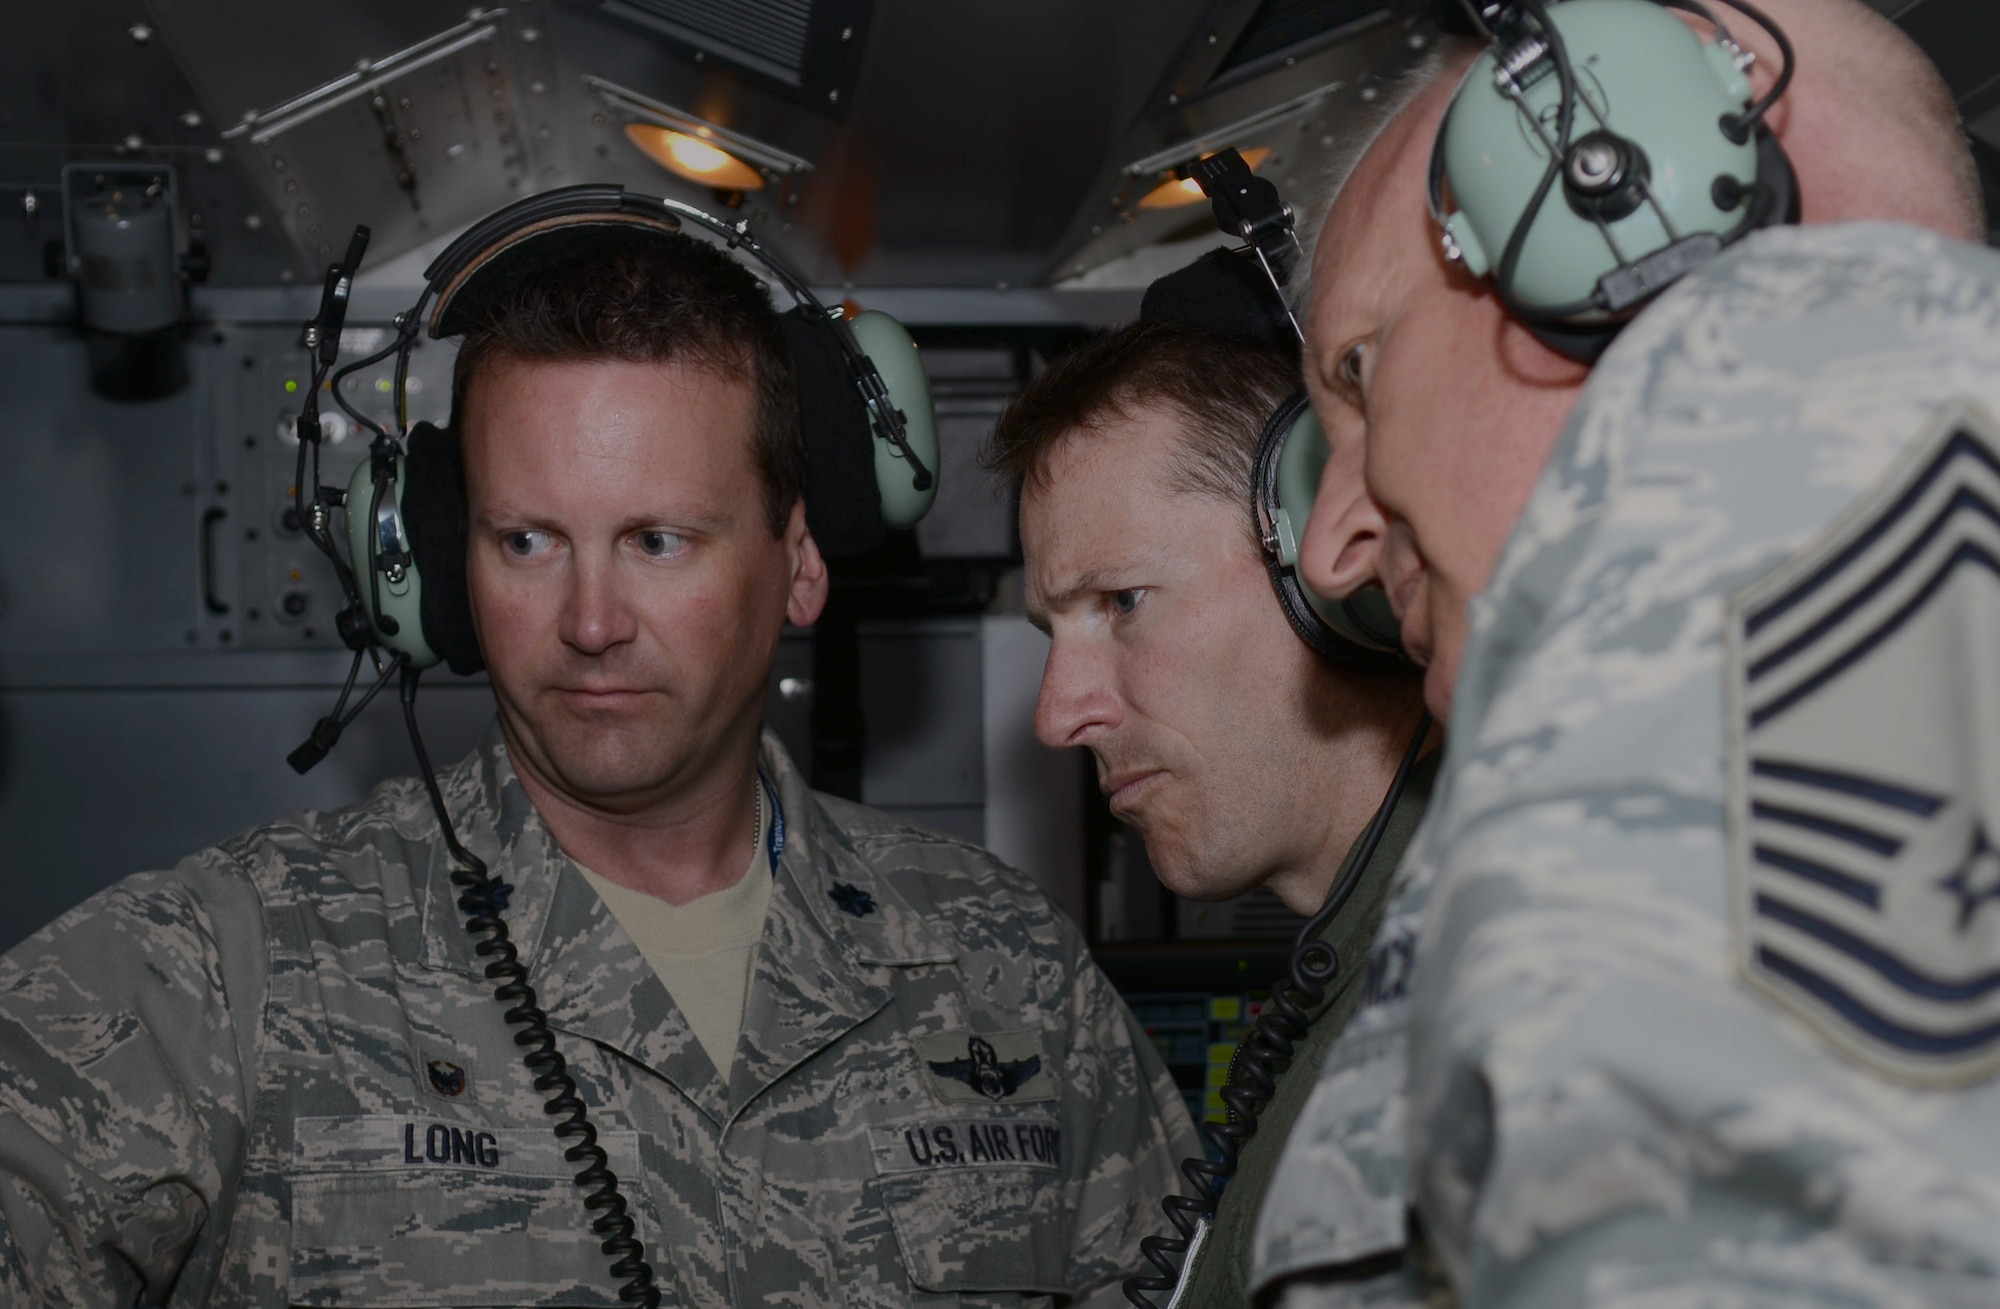 U.S. Air Force Lt. Col. Robert Long, left, 606th Expeditionary Air Control Squadron commander from Fort Worth, Texas, shows his unit’s operations to U.S. Air Force Lt. Col. Steven Horton, center, 52nd Air Expeditionary Group commander from Sunrise Beach, Texas, and U.S. Air Force Chief Master Sgt. Bruce Zahn, 52nd Expeditionary Operations Group superintendent from Westhope, N.D., June 12, 2014, at Powidz Air Base, Poland. The 606th EACS is primarily supporting EAGLE TALON, a Polish national air exercise, to increase interoperability with air-to-air and air-to-surface training involving Polish, U.S., French, British and NATO aircraft. (U.S. Air Force photo/Airman 1st Class Kyla Gifford/Released)
